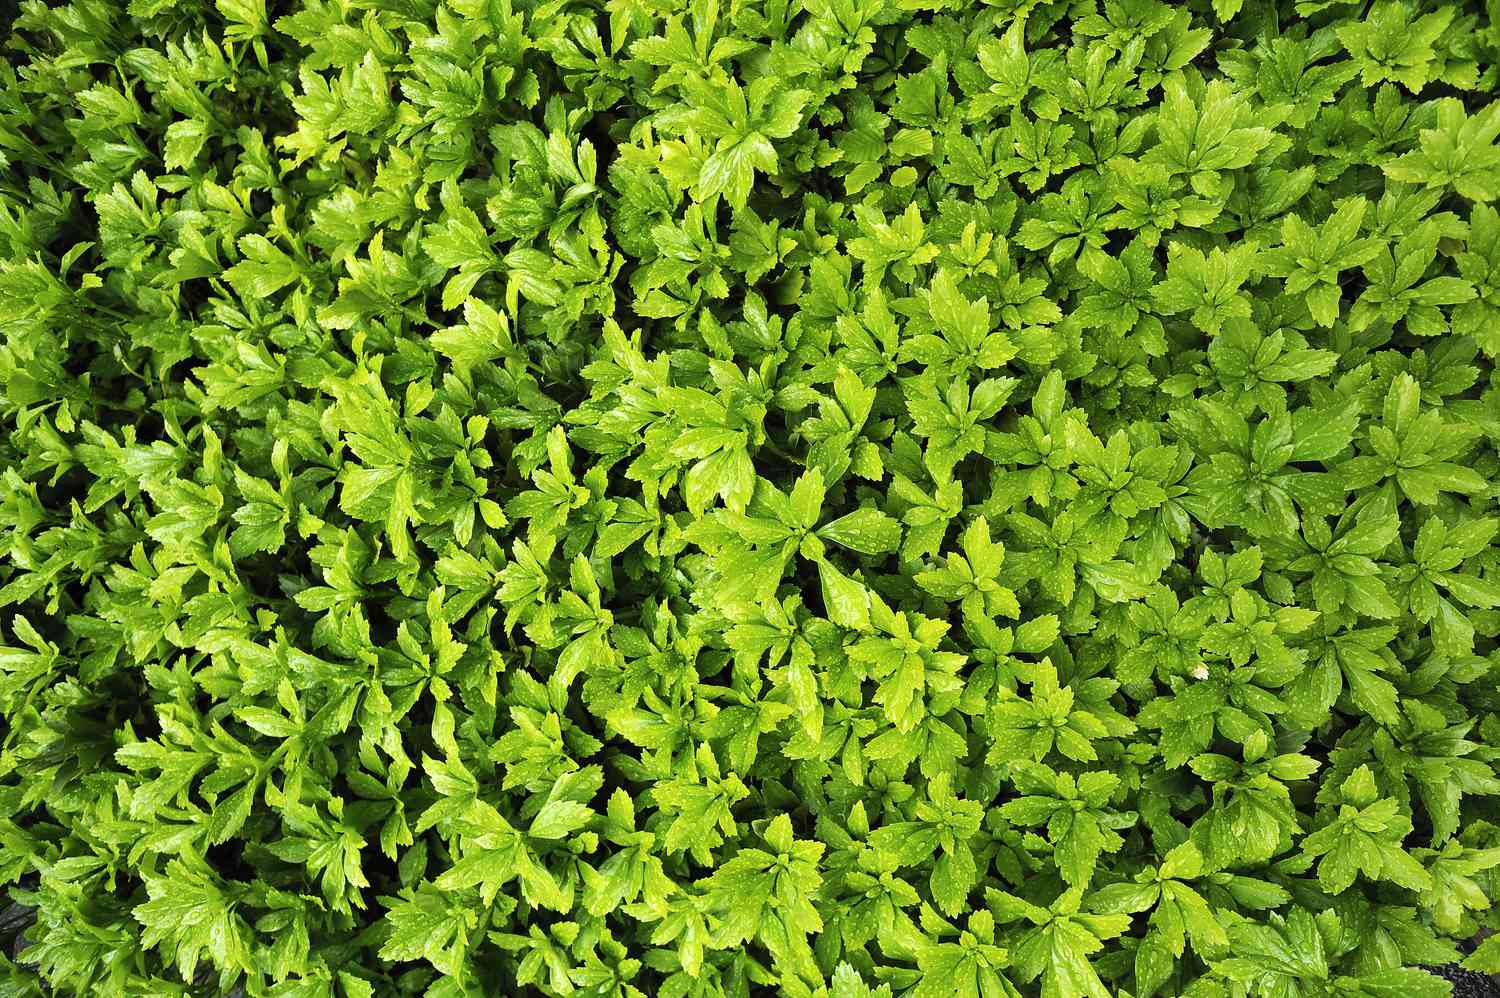 What Is The Most Deer-Resistant Ground Cover?